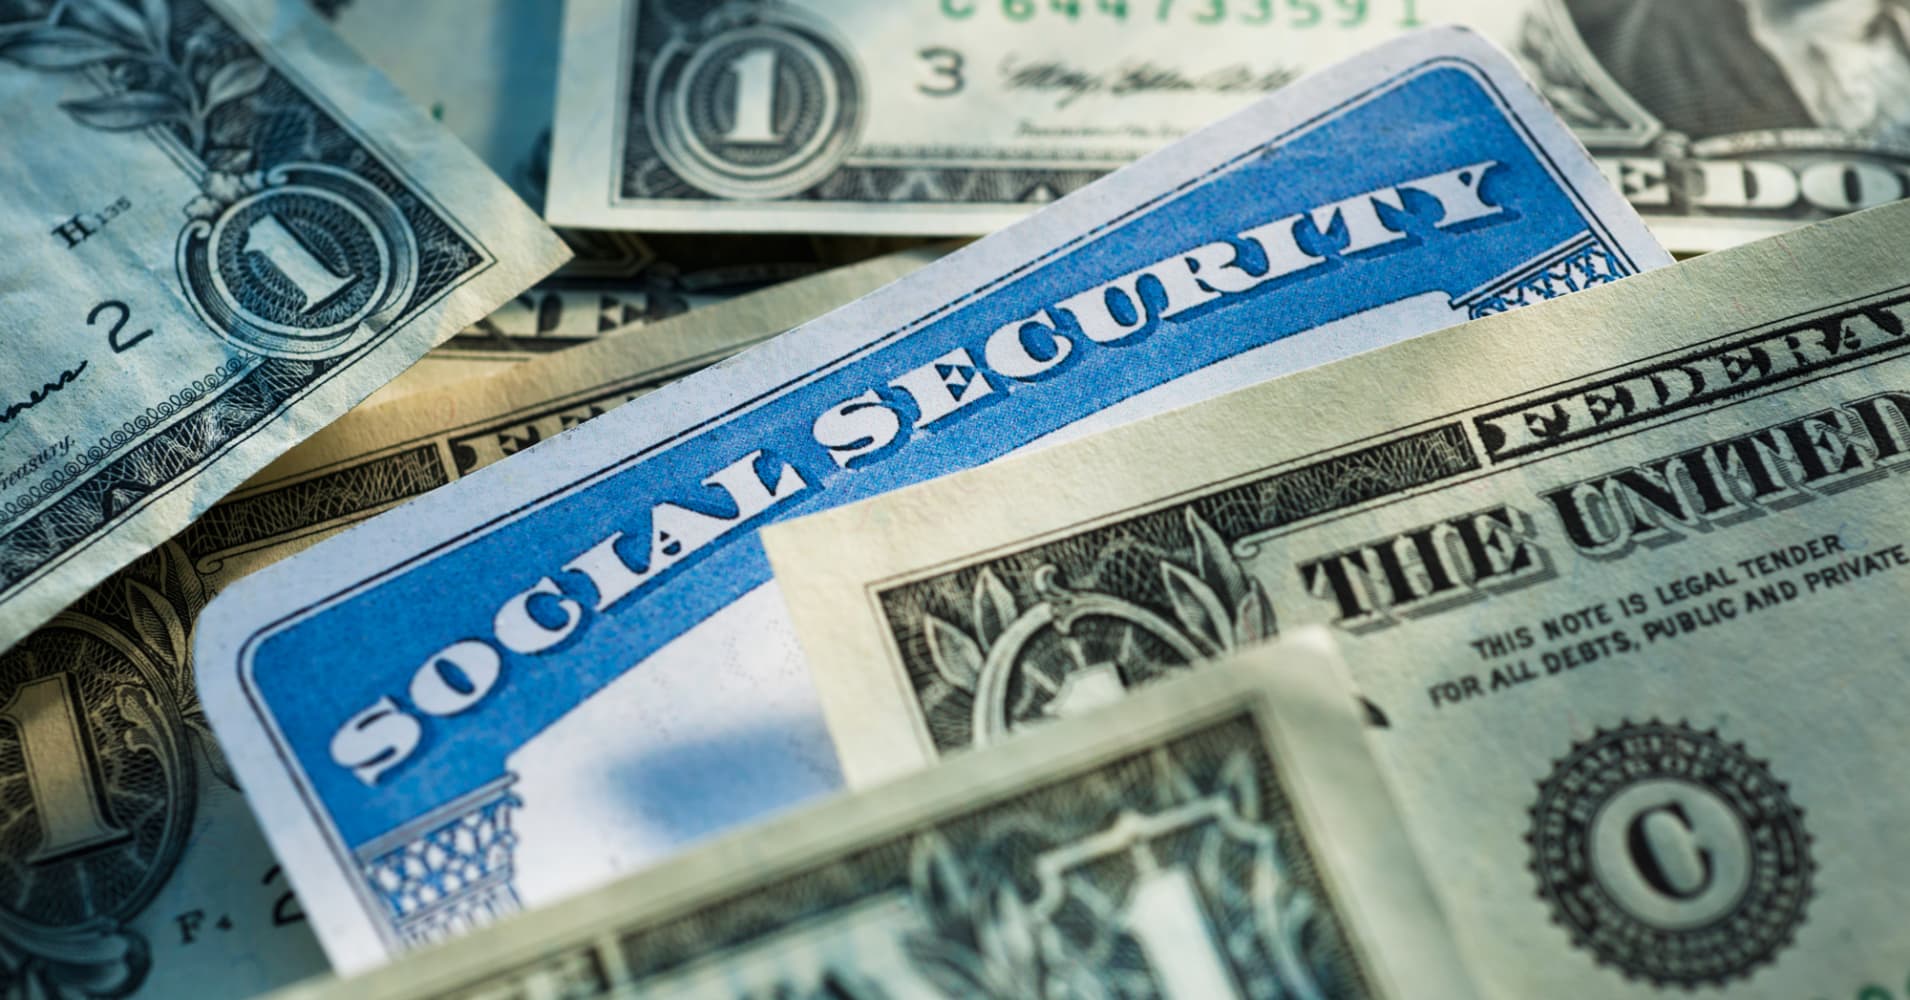 What are the advantages of applying for Social Security benefits online?